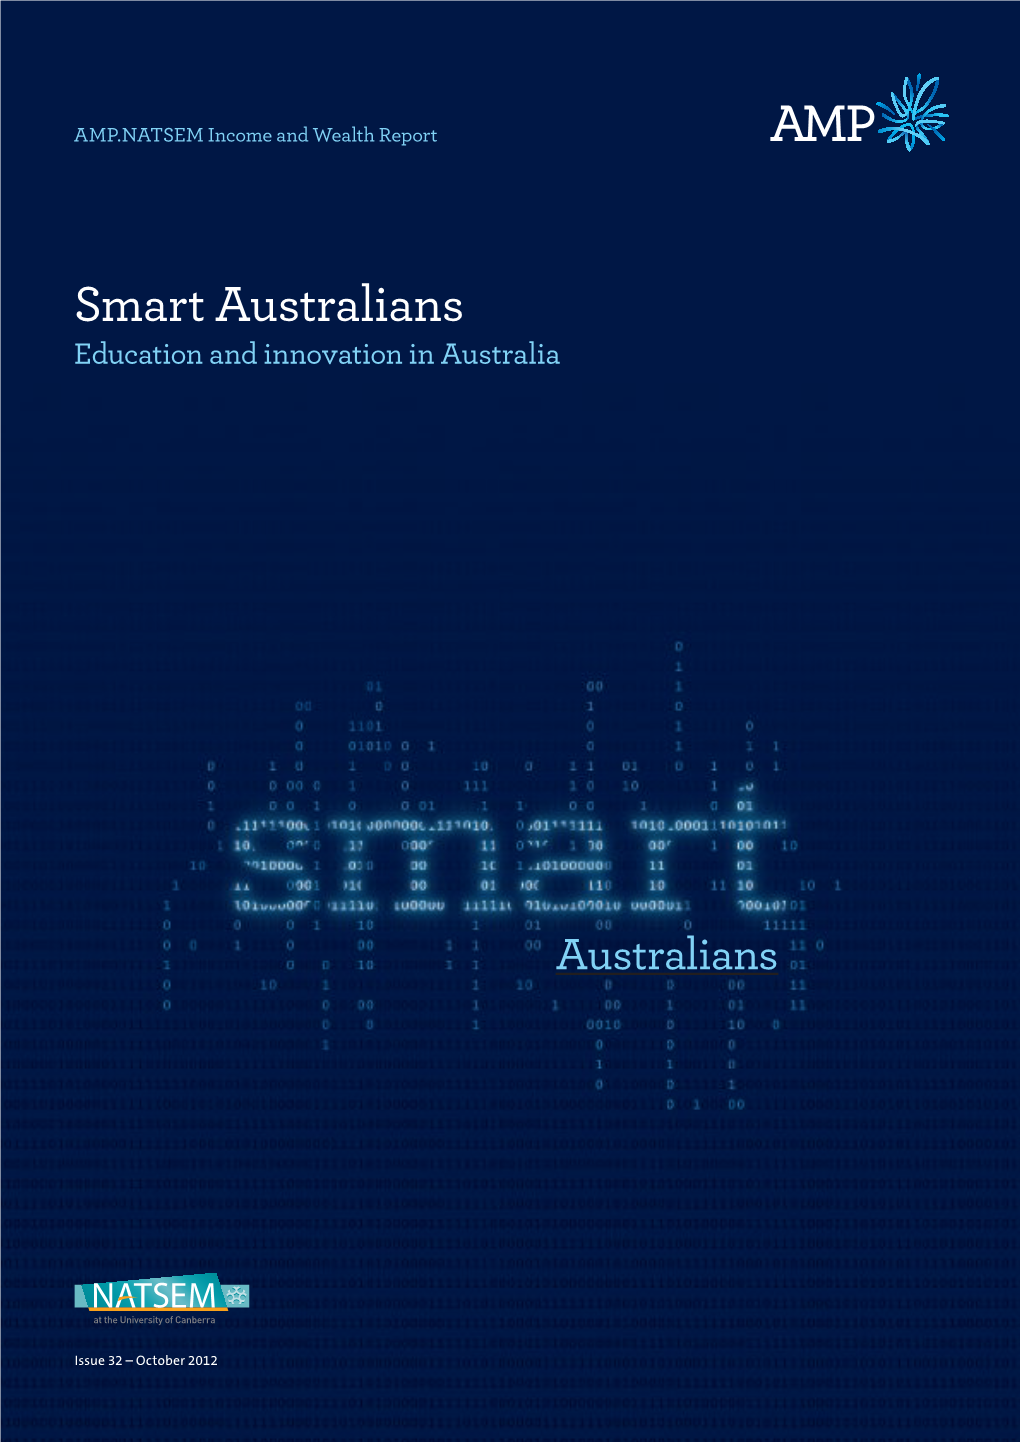 Smart Australians: Education and Innovation in Australia, AMP.NATSEM Income and Wealth Report, Issue 32, October 2012, Melbourne, AMP